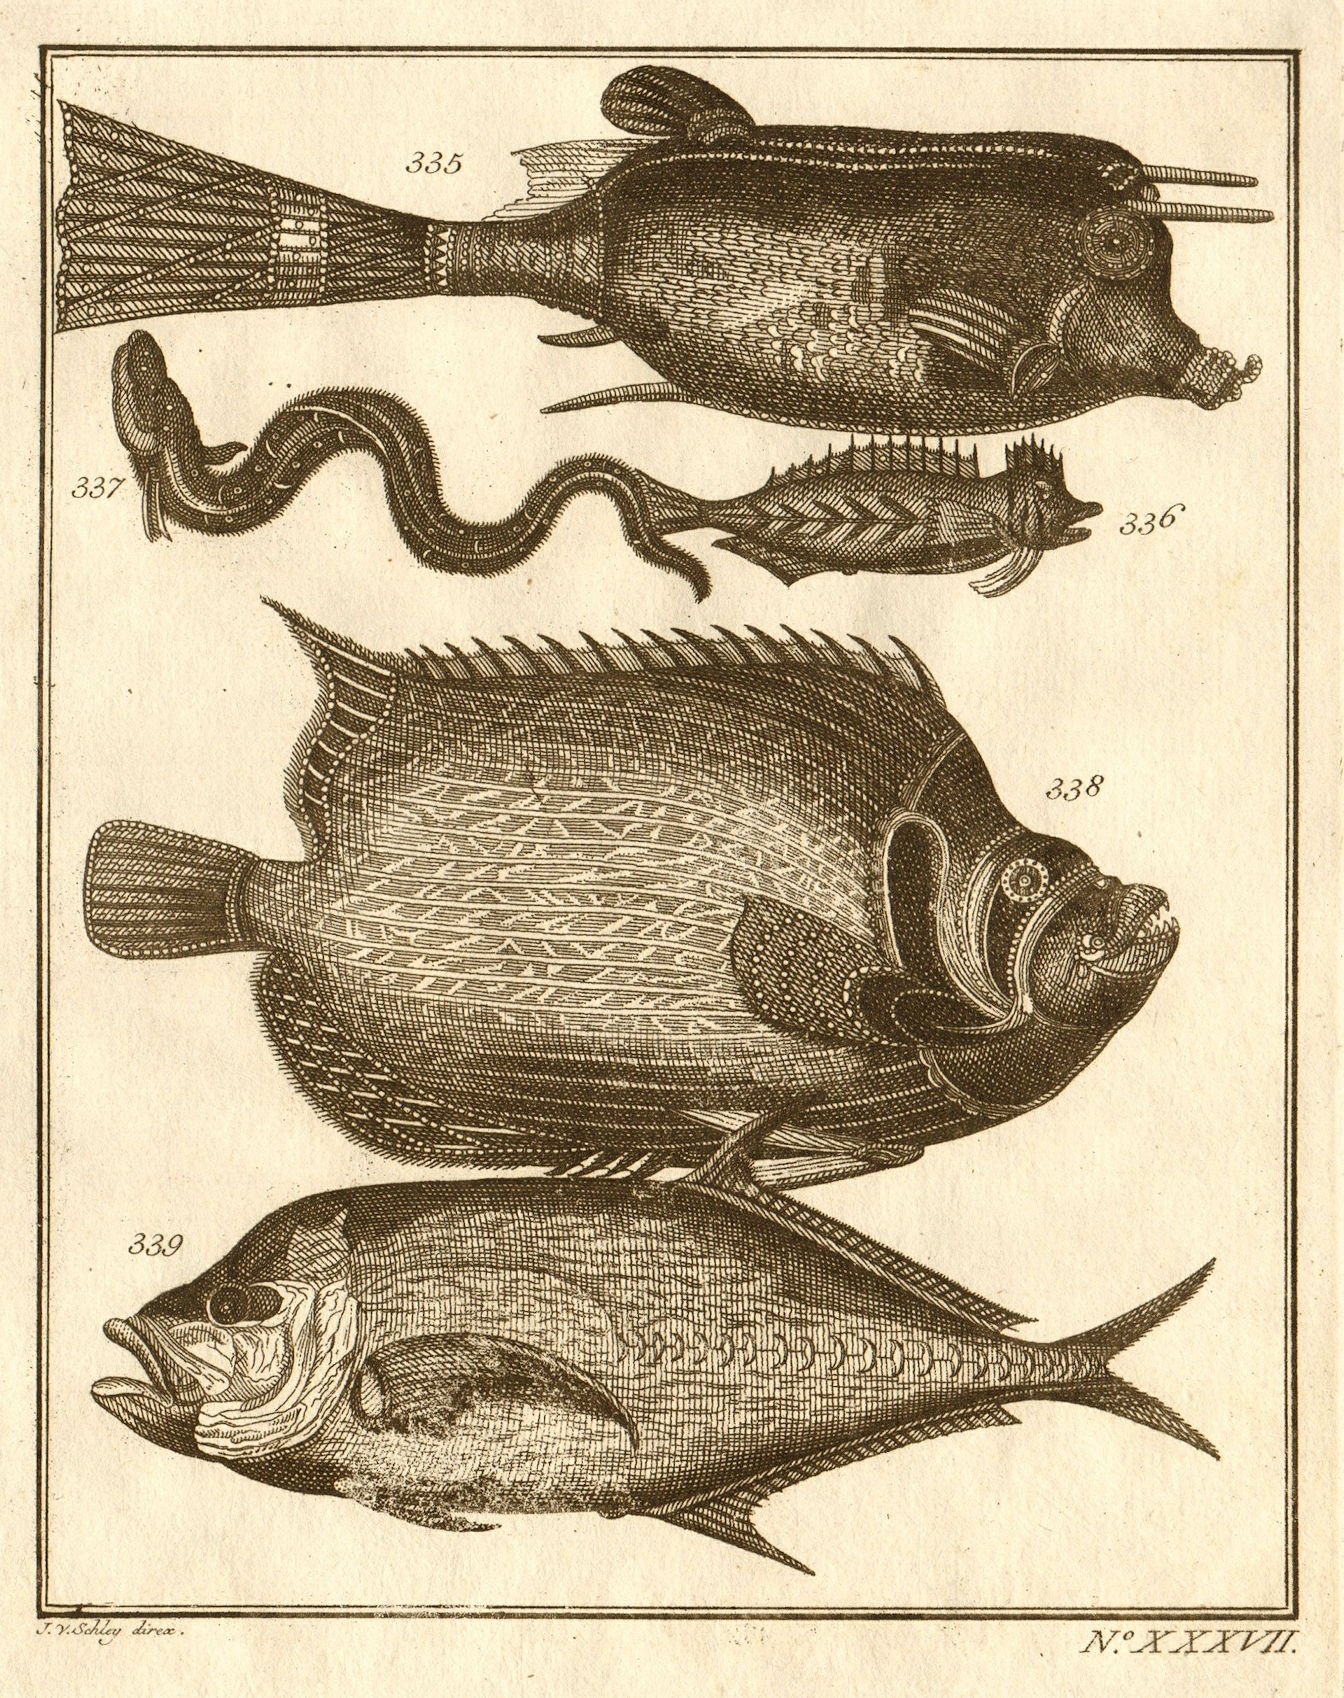 Associate Product XXXVII. Poissons d'Ambione. Indonesia Moluccas Maluku tropical fish. SCHLEY 1763